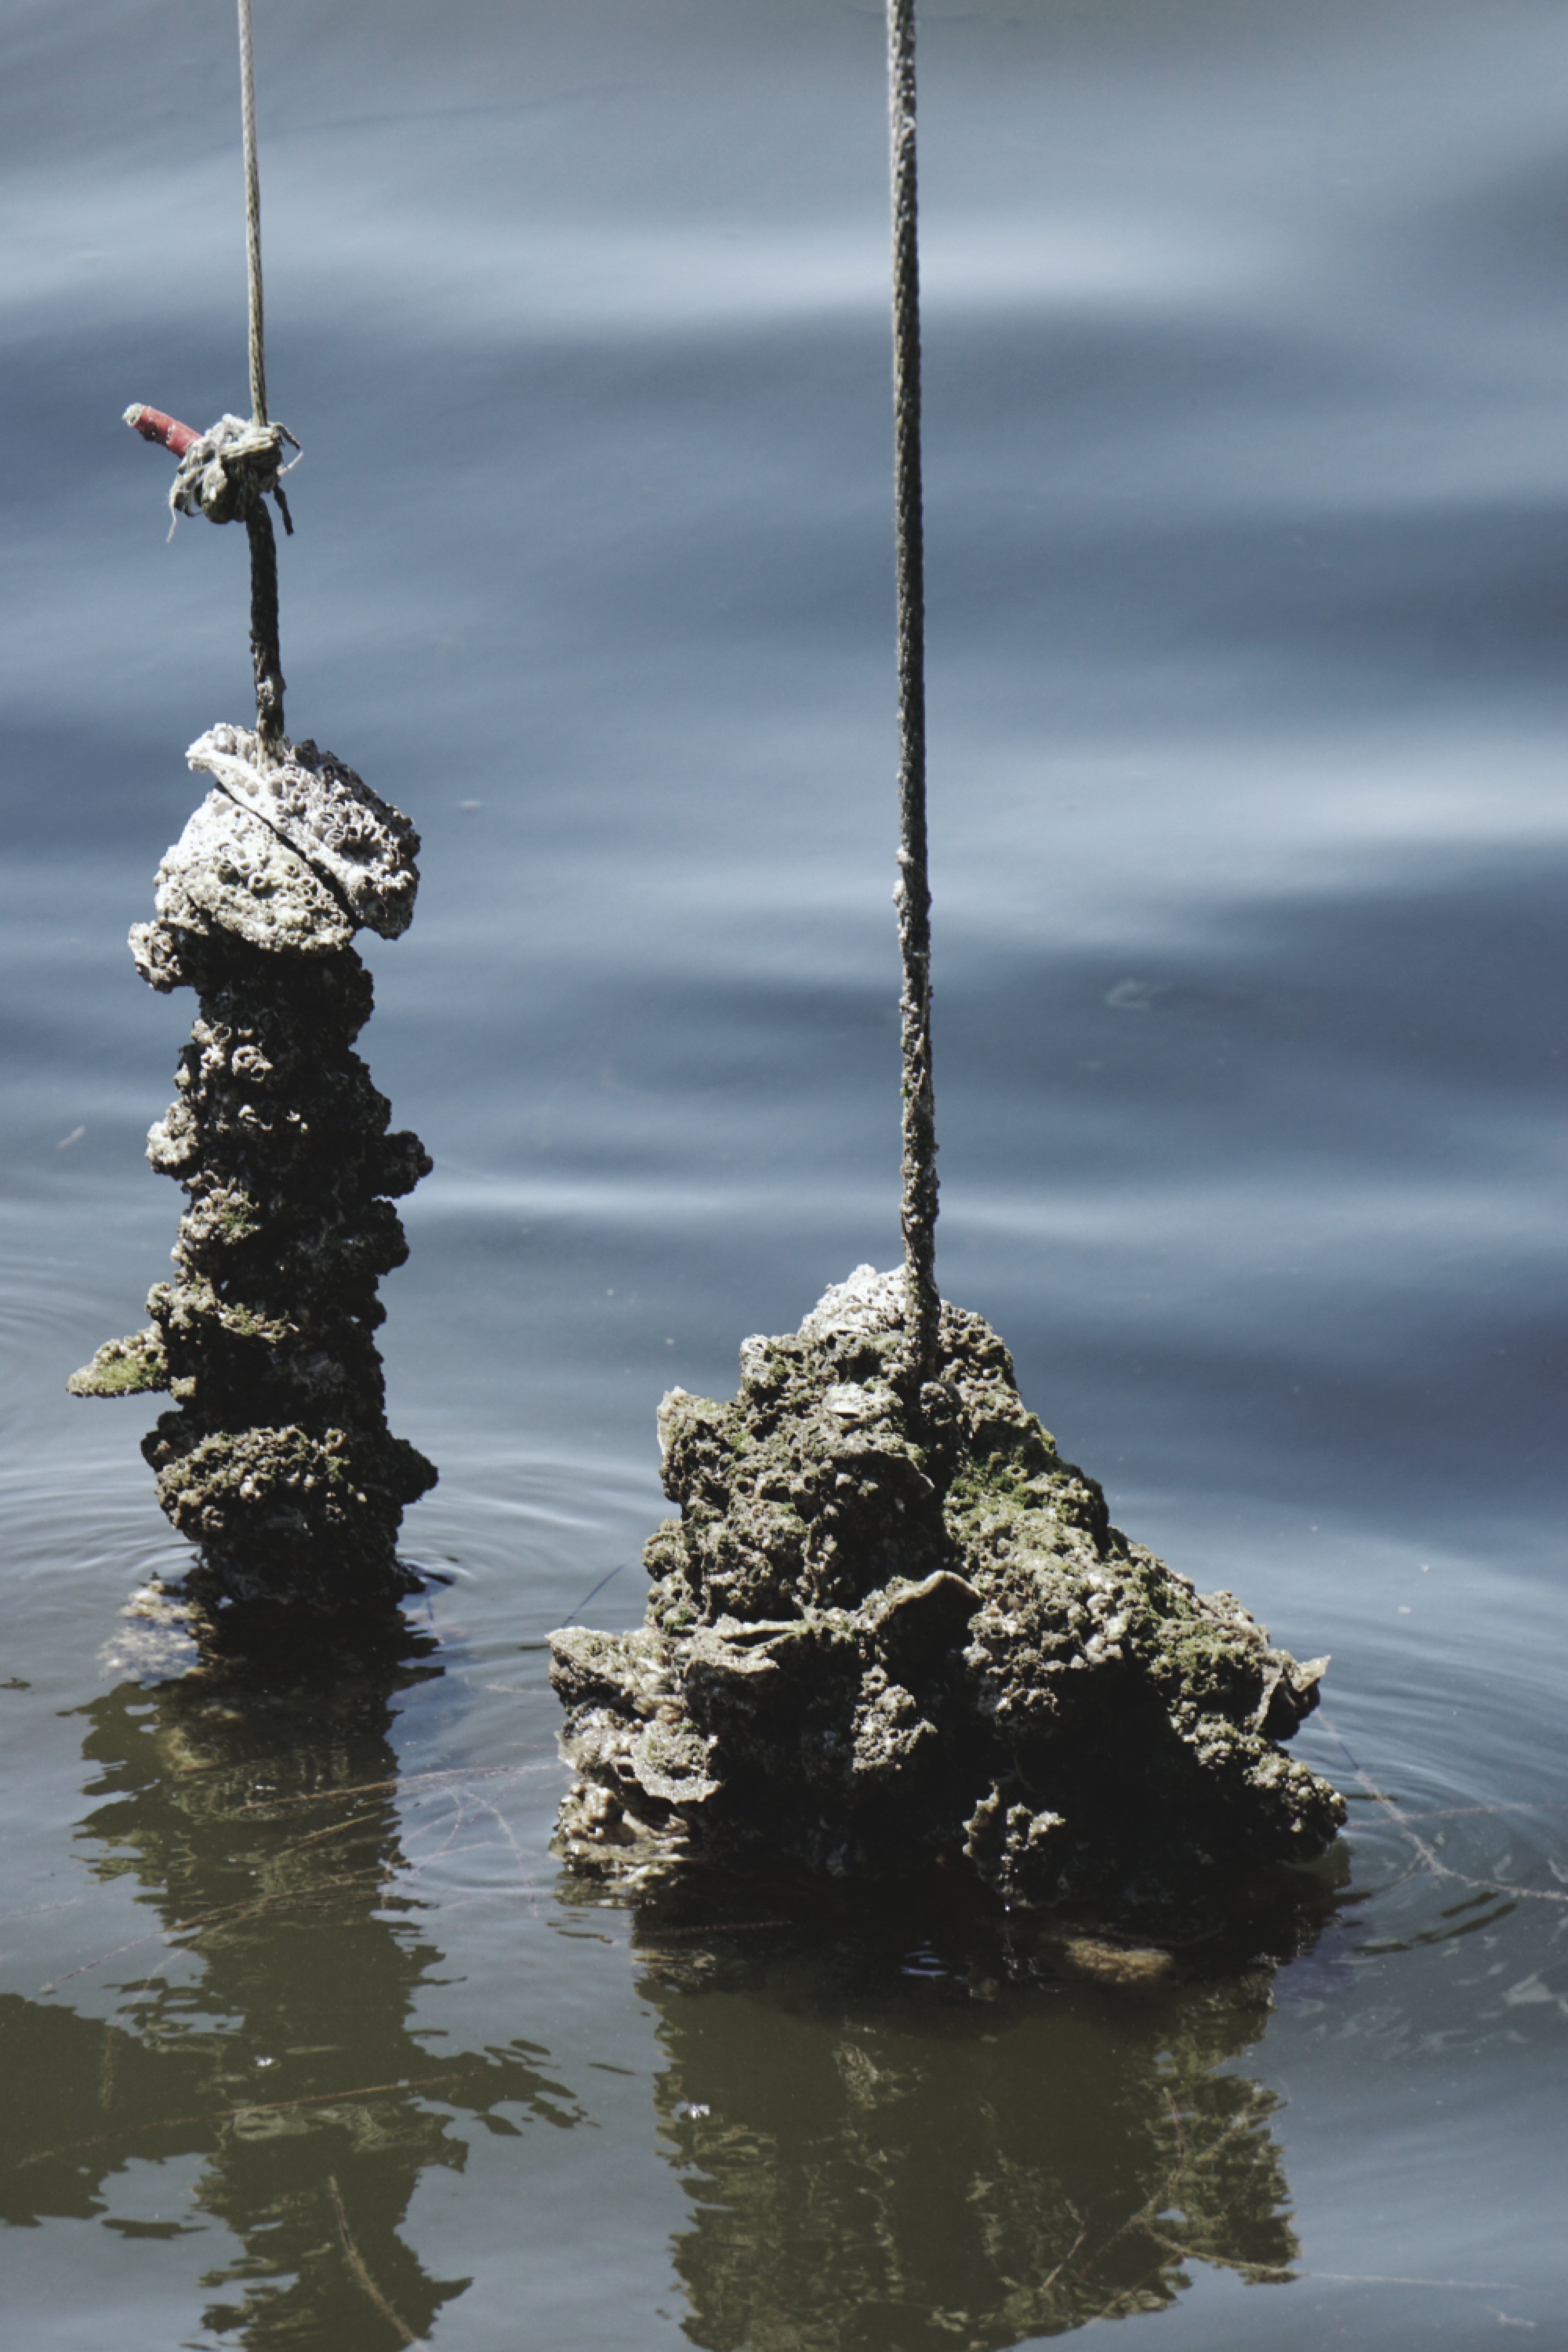 Restoration of oyster reefs is a critical management goal to support key habitats in Tampa Bay.